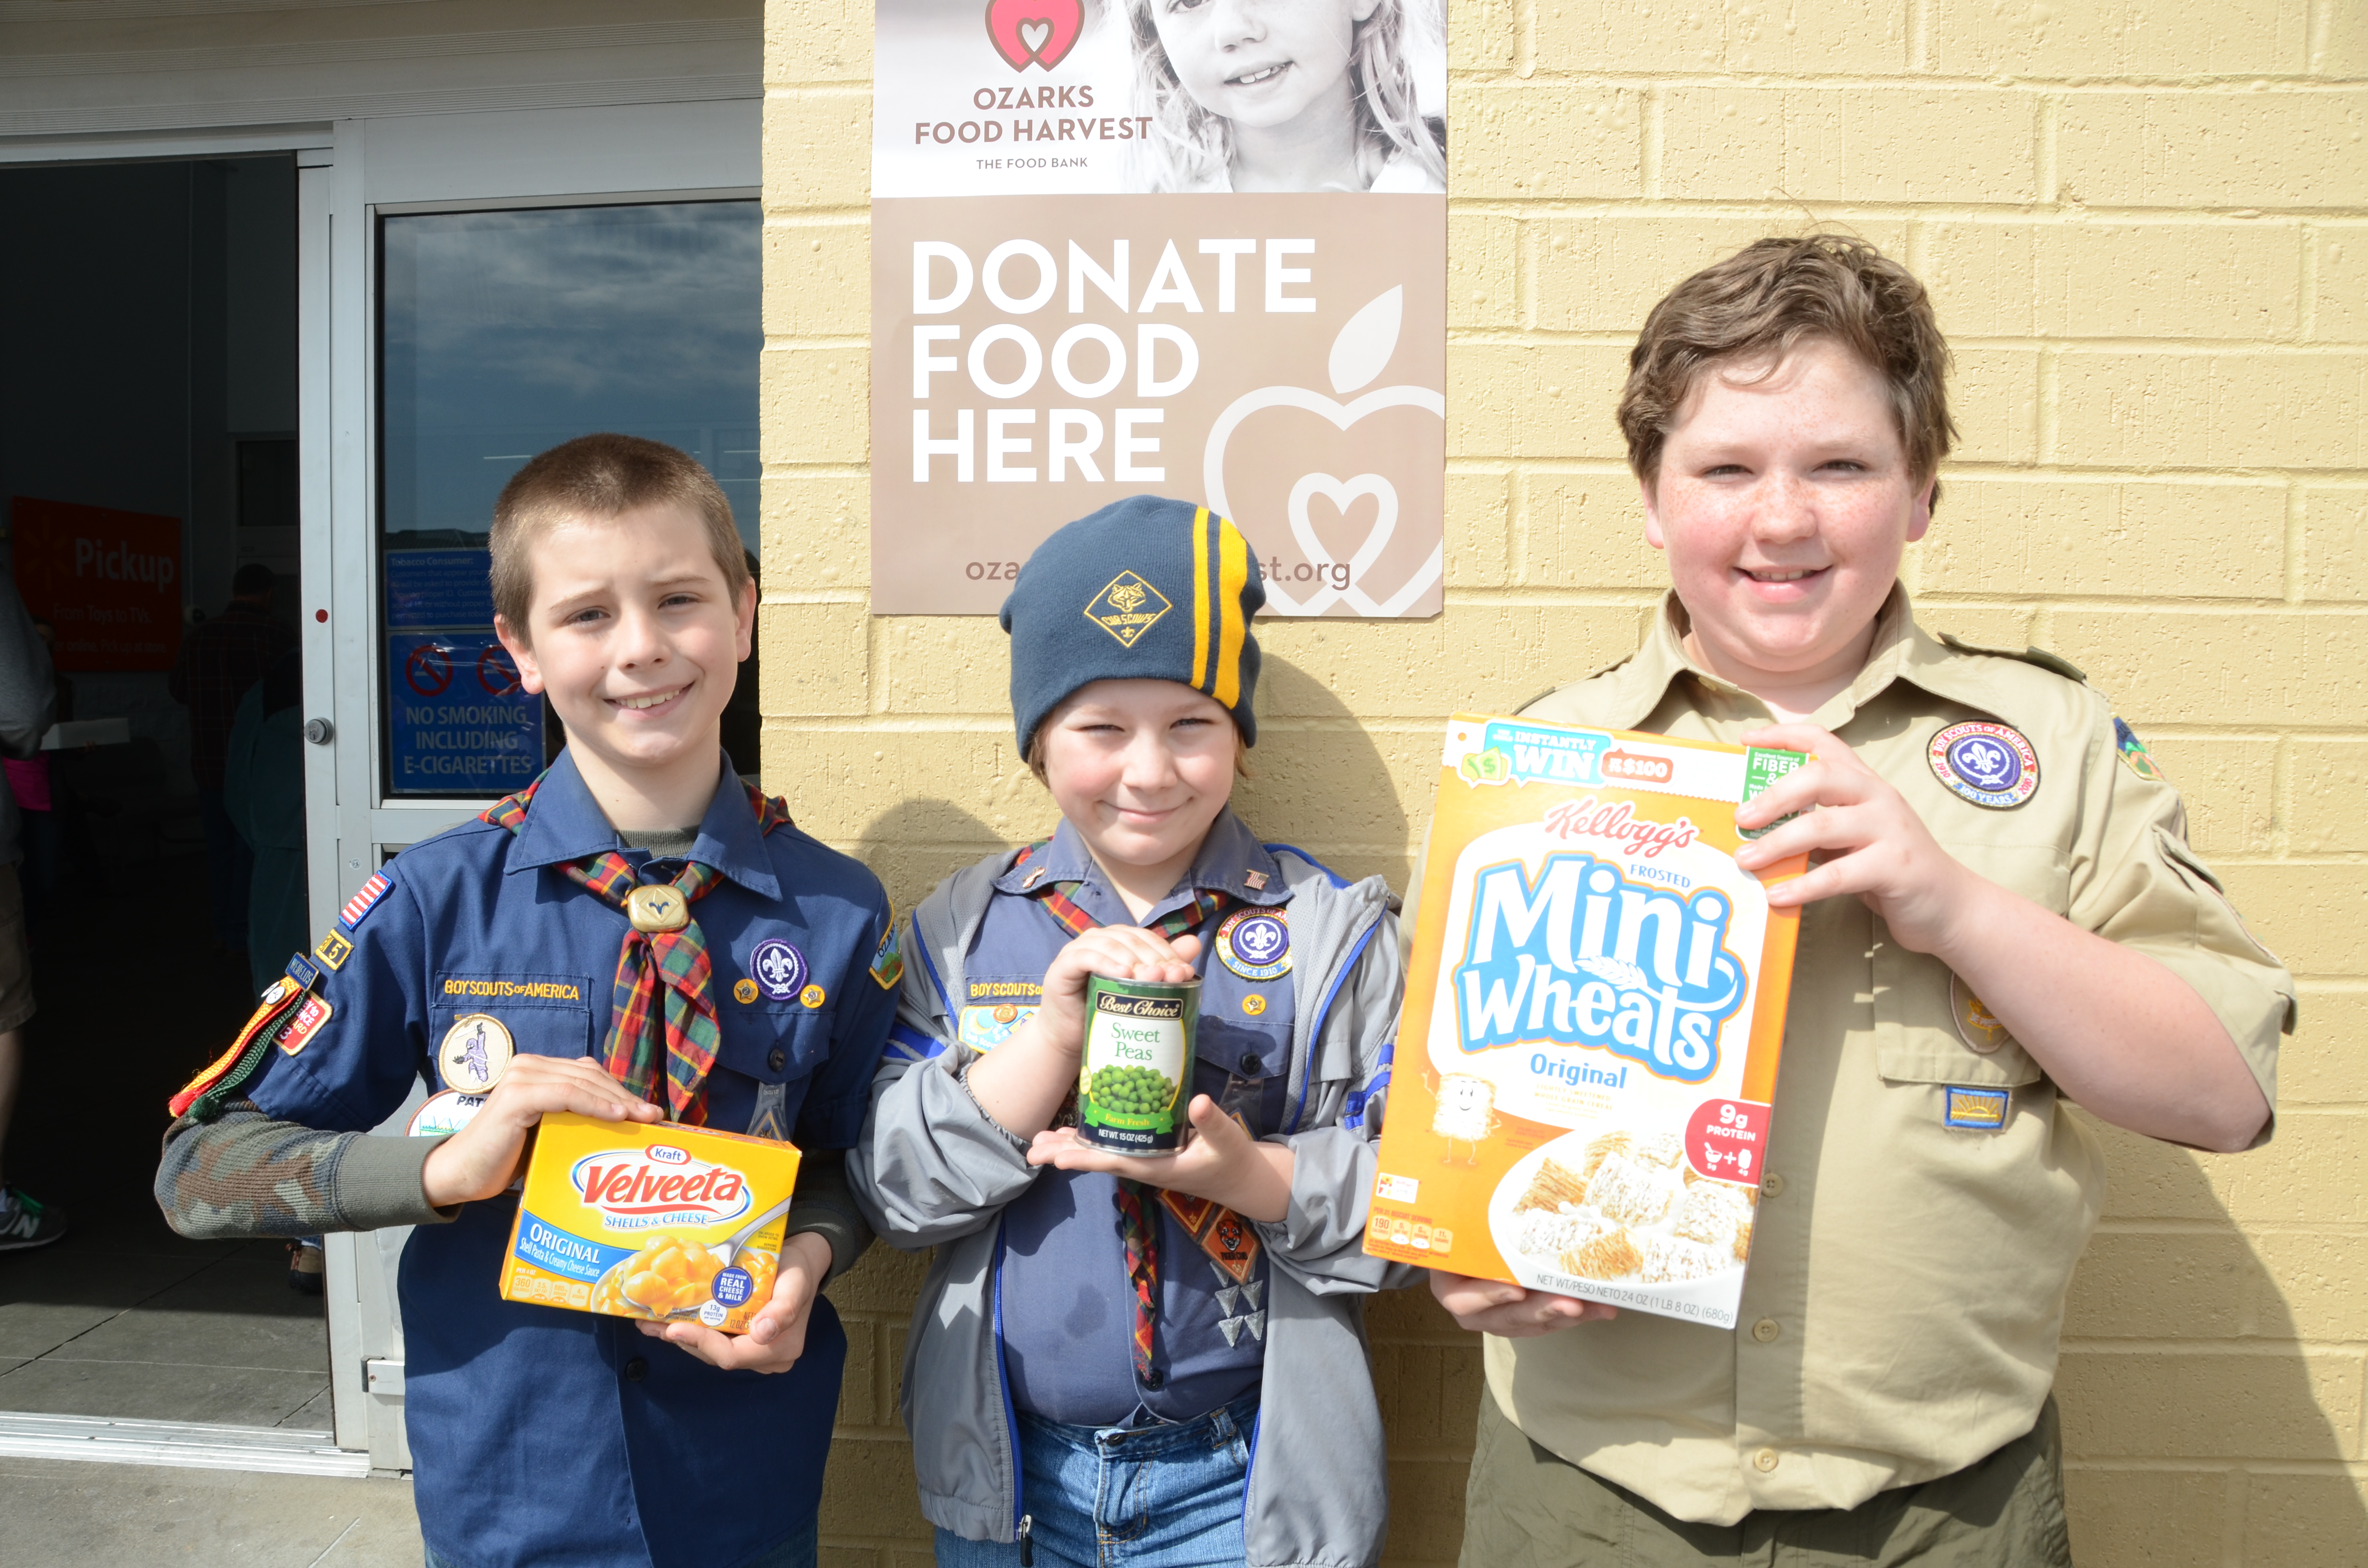 Scouting for Food provides 27,000 meals